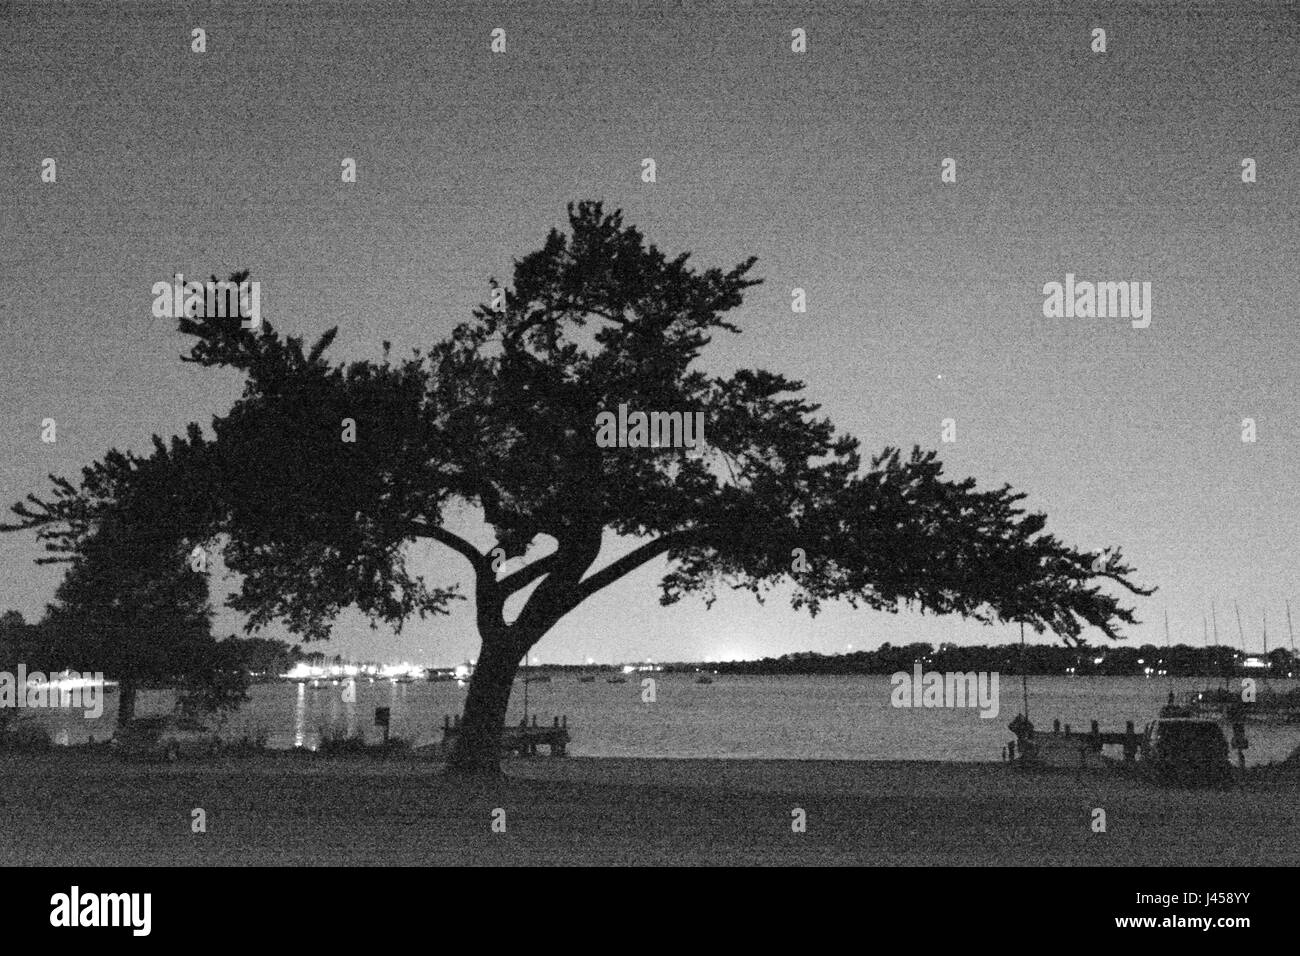 A grainy black and white photo of a live oak tree at White Rock Lake, silhouetted by the glow of downtown Dallas at night Stock Photo